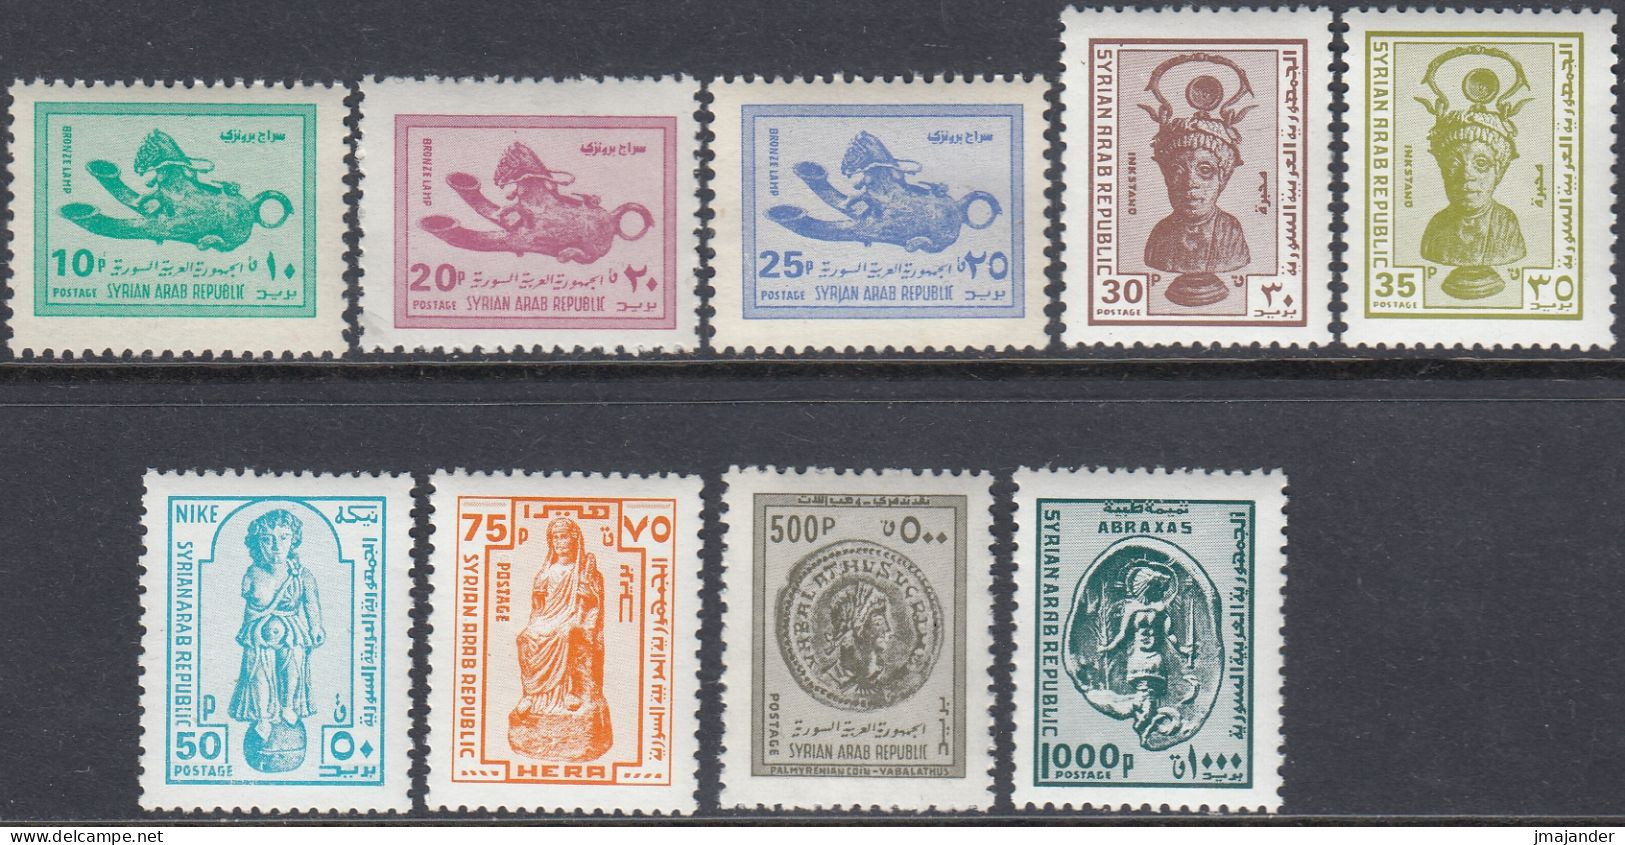 Syria 1976 - Definitive Stamp Set: Archaeological Findings - Mi 1313-1321 ** MNH - Syria